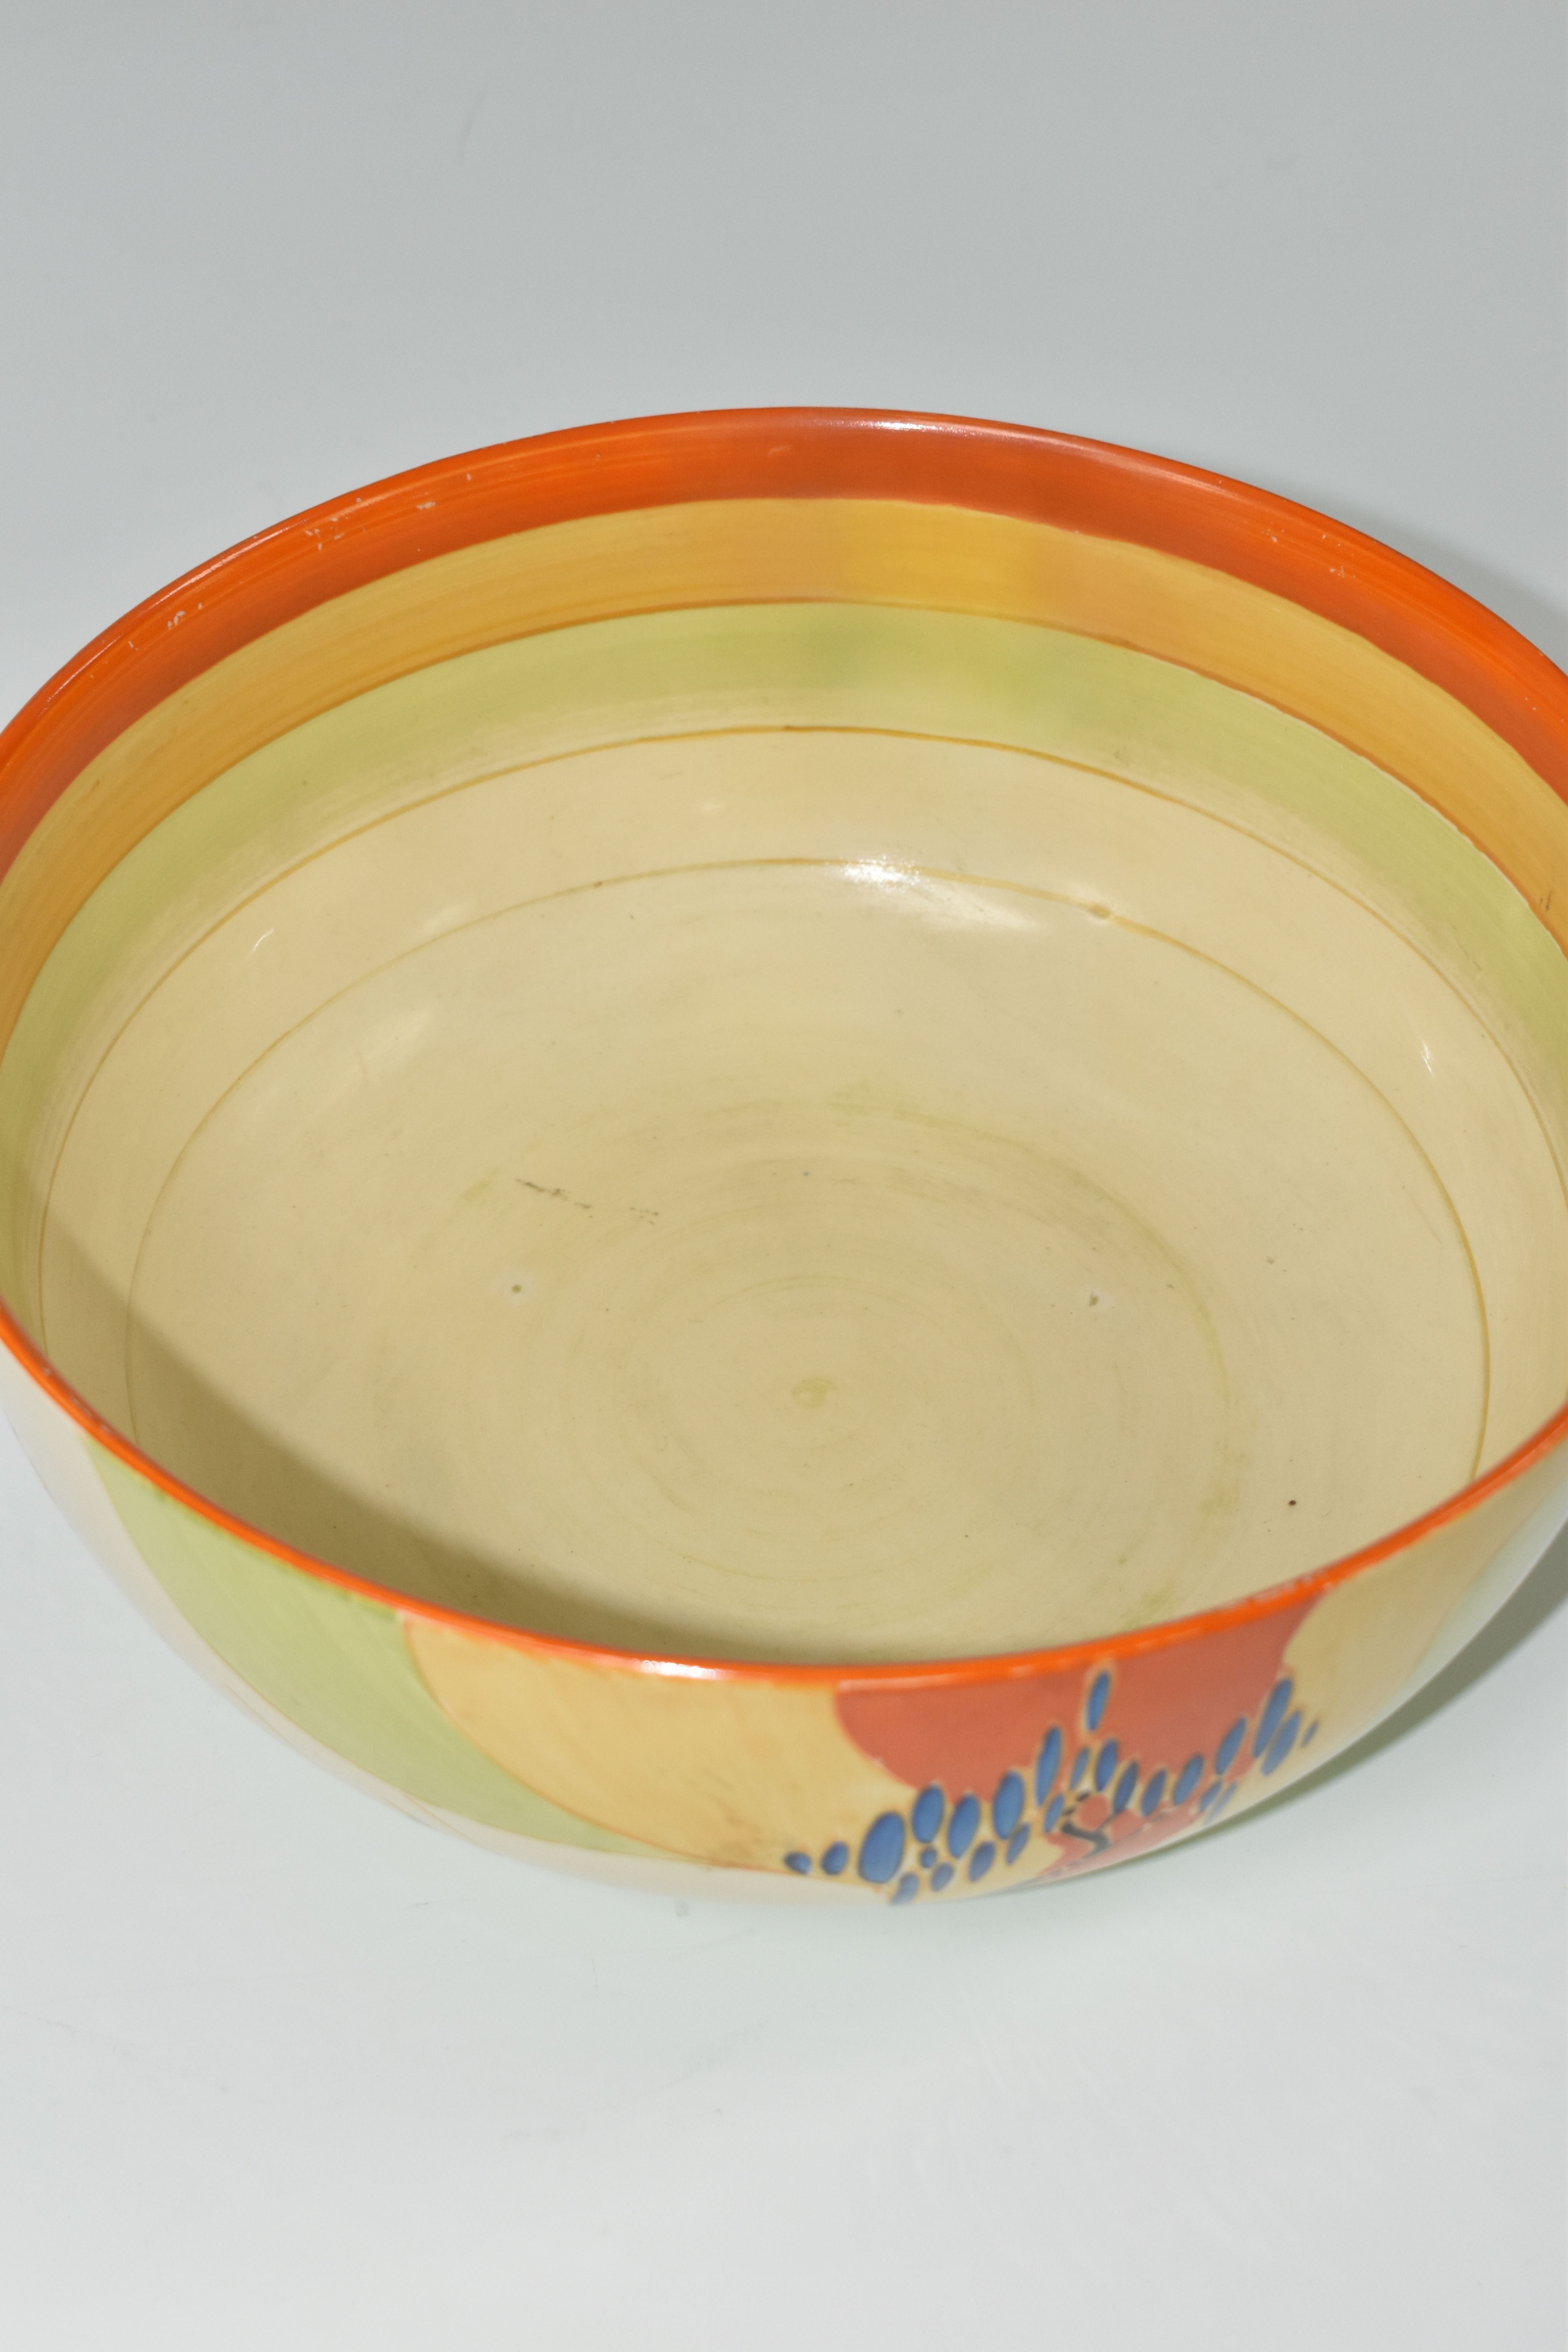 A CLARICE CLIFF 'WINDBELLS' DESIGN BOWL, with a vibrant orange, yellow, green and cream banding on - Image 5 of 7